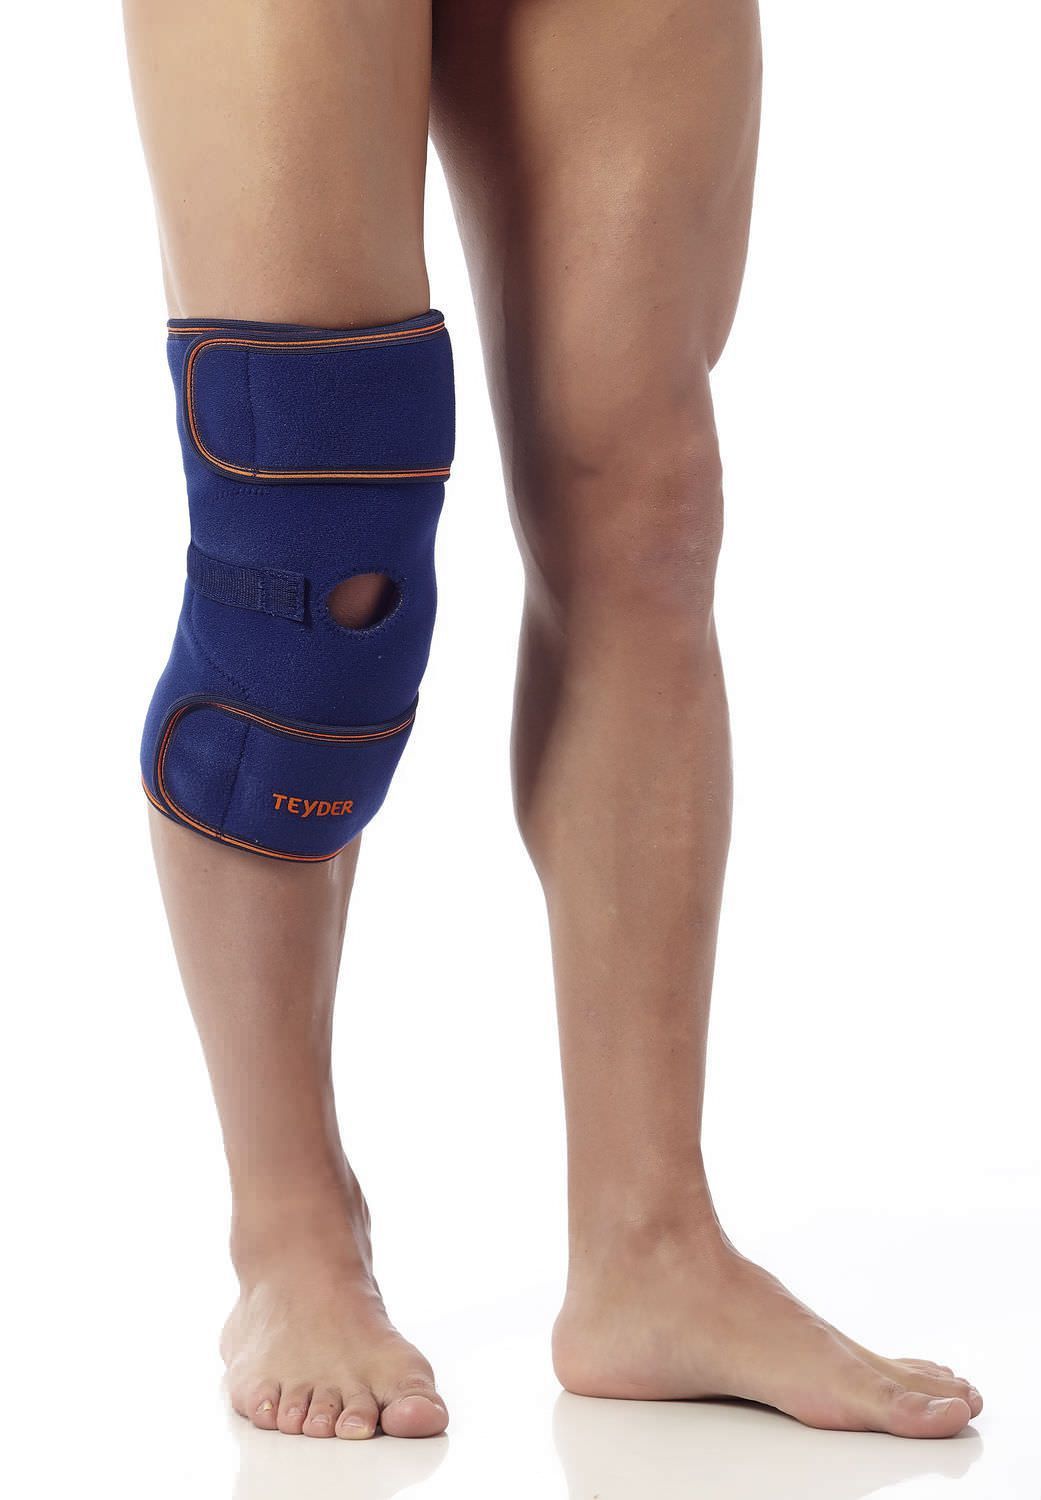 Knee orthosis (orthopedic immobilization) / with flexible stays / open knee Neothermik Teyder